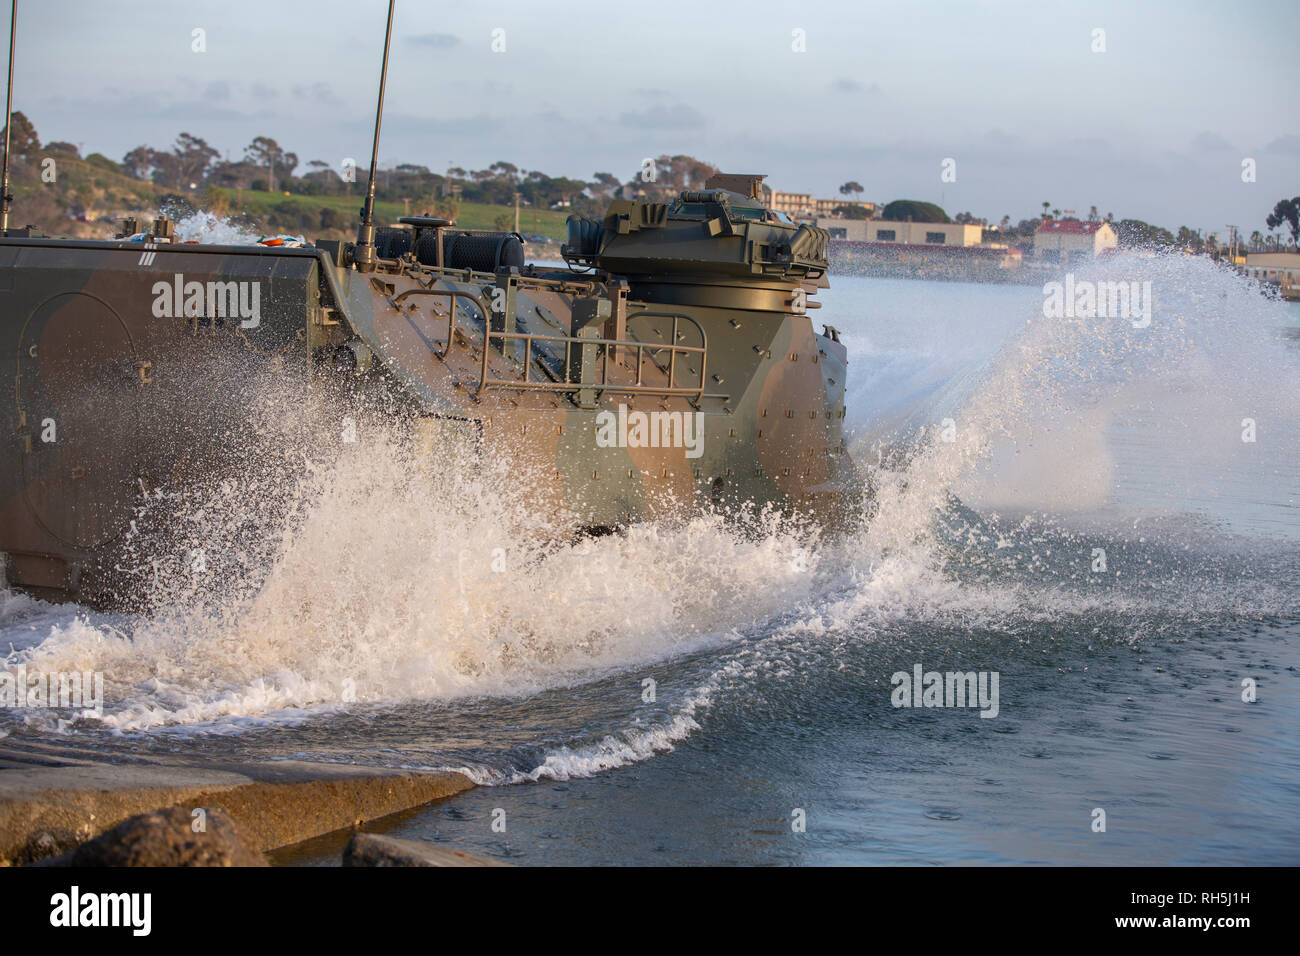 A Japan Ground Self-Defense Force assault amphibious vehicle enters the water and travels to the USS Somerset (LPD 25) during Iron Fist 2019, Jan. 30 on U.S. Marine Corps Base Camp Pendleton, CA. Exercise Iron Fist is an annual, multilateral training exercise where U.S. and Japanese service members train together and share techniques, tactics and procedures to improve their combined operational capabilities. (U.S. Marine Corps photo by Cpl. Cutler Brice) Stock Photo